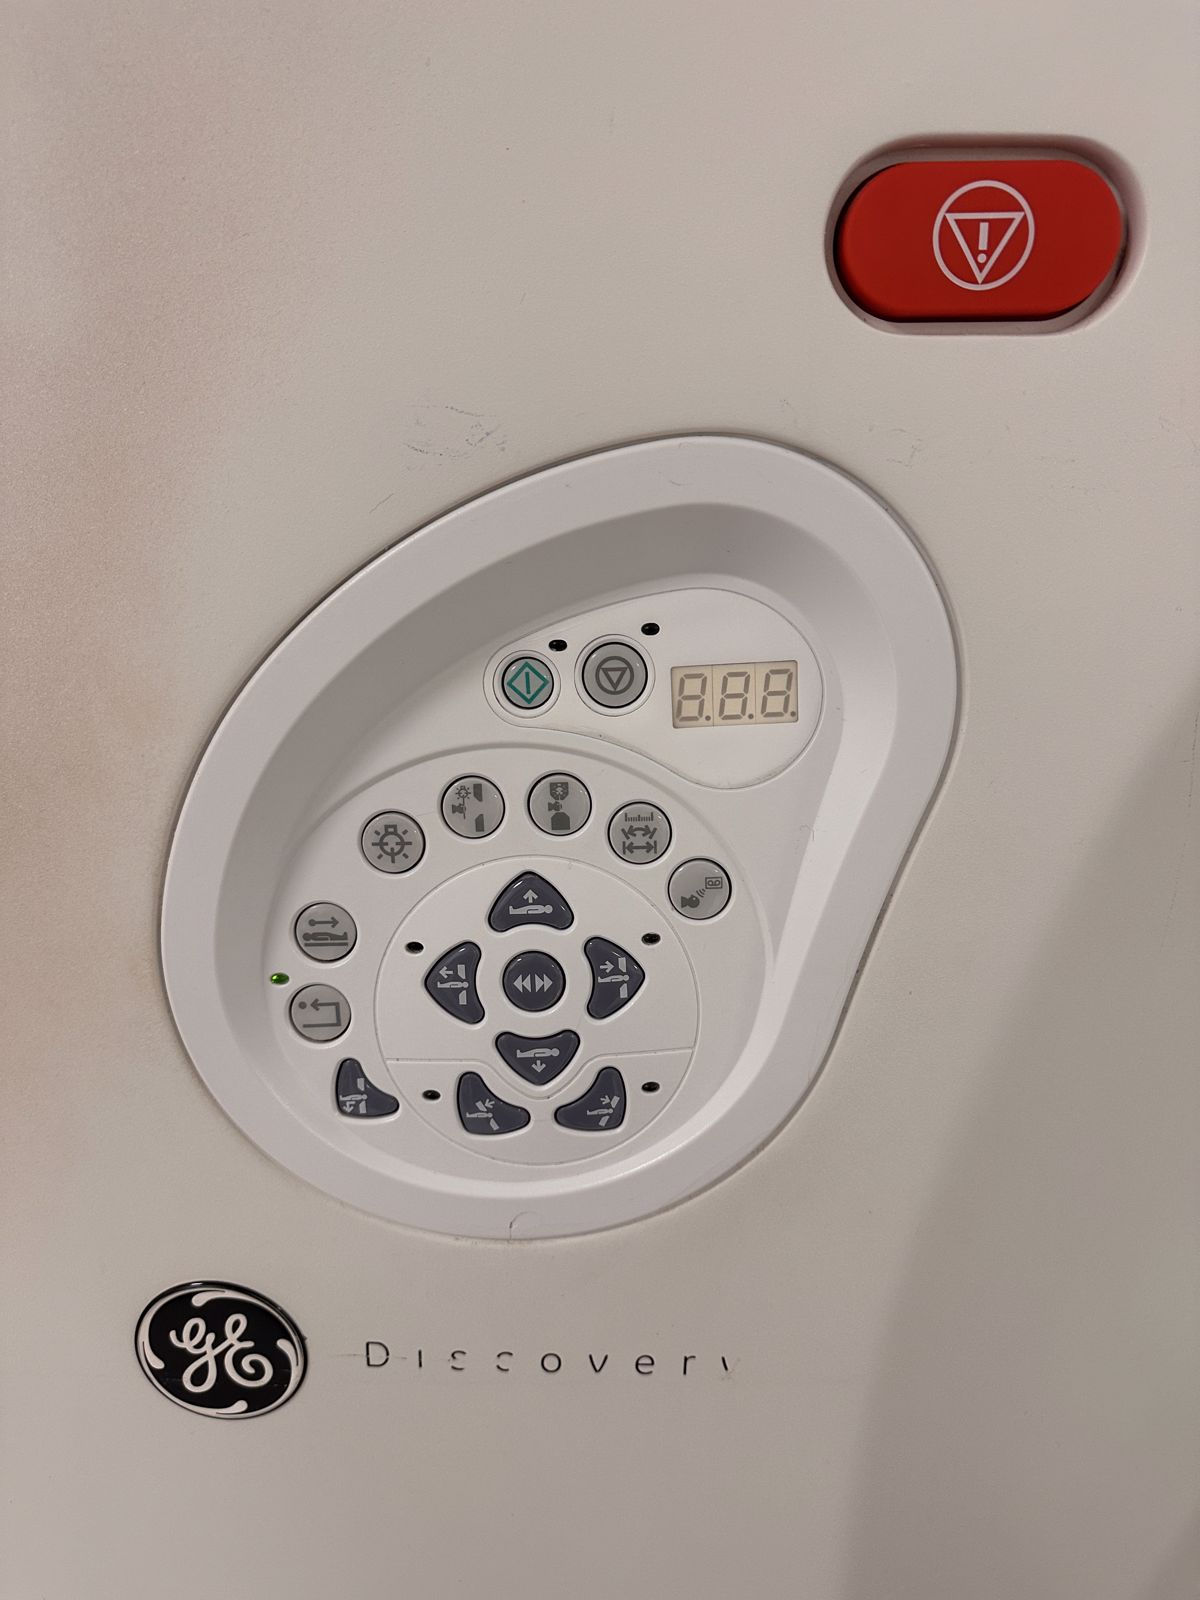 GE Discovery RT 16 - 2017